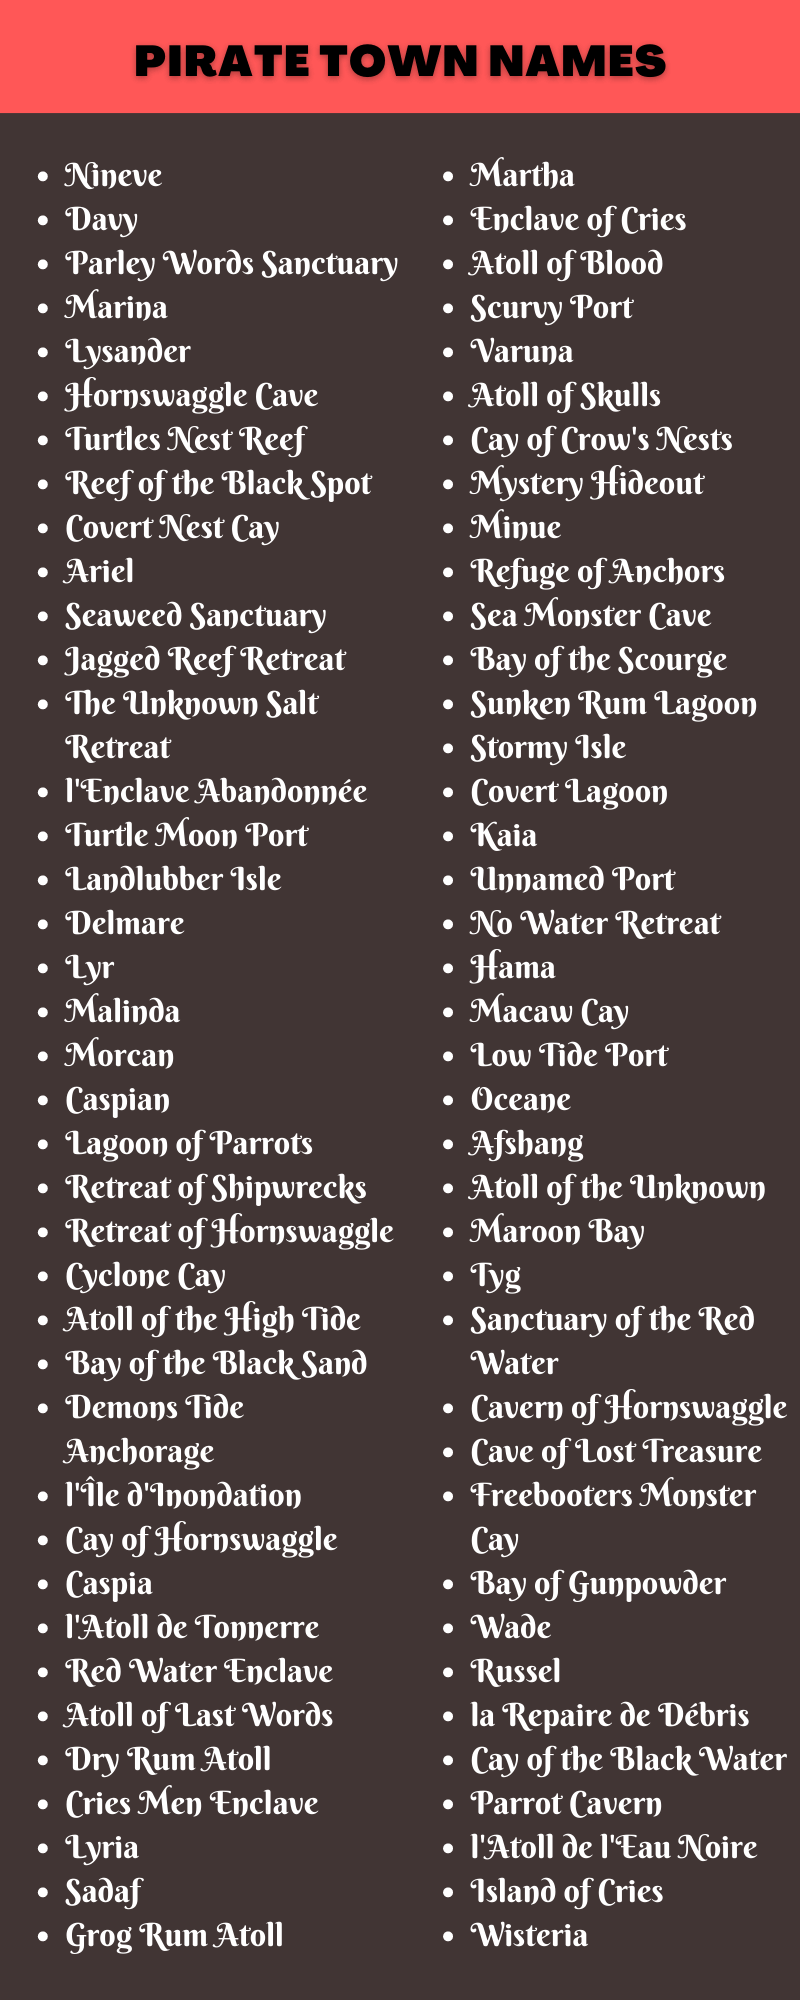 Pirate Town Names